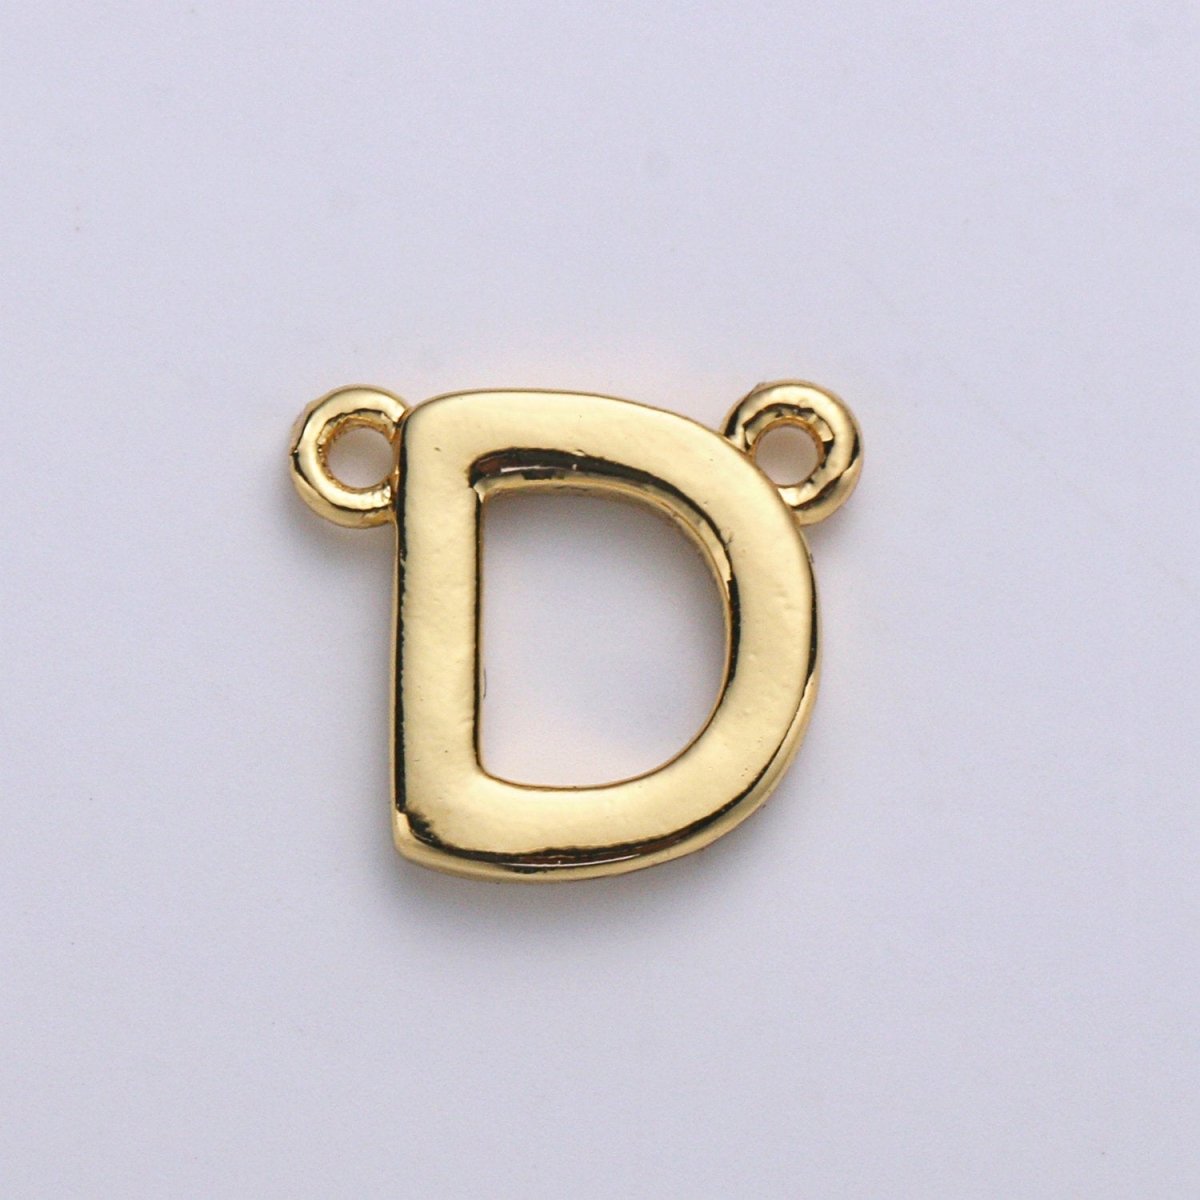 14k Gold Filled Personalized Initial Charm Initial Pendant, Letter Charm, Minimalist Alphabet Letter Charm, VOTE Charm for Bracelet Necklace A-127 to A-139 - DLUXCA